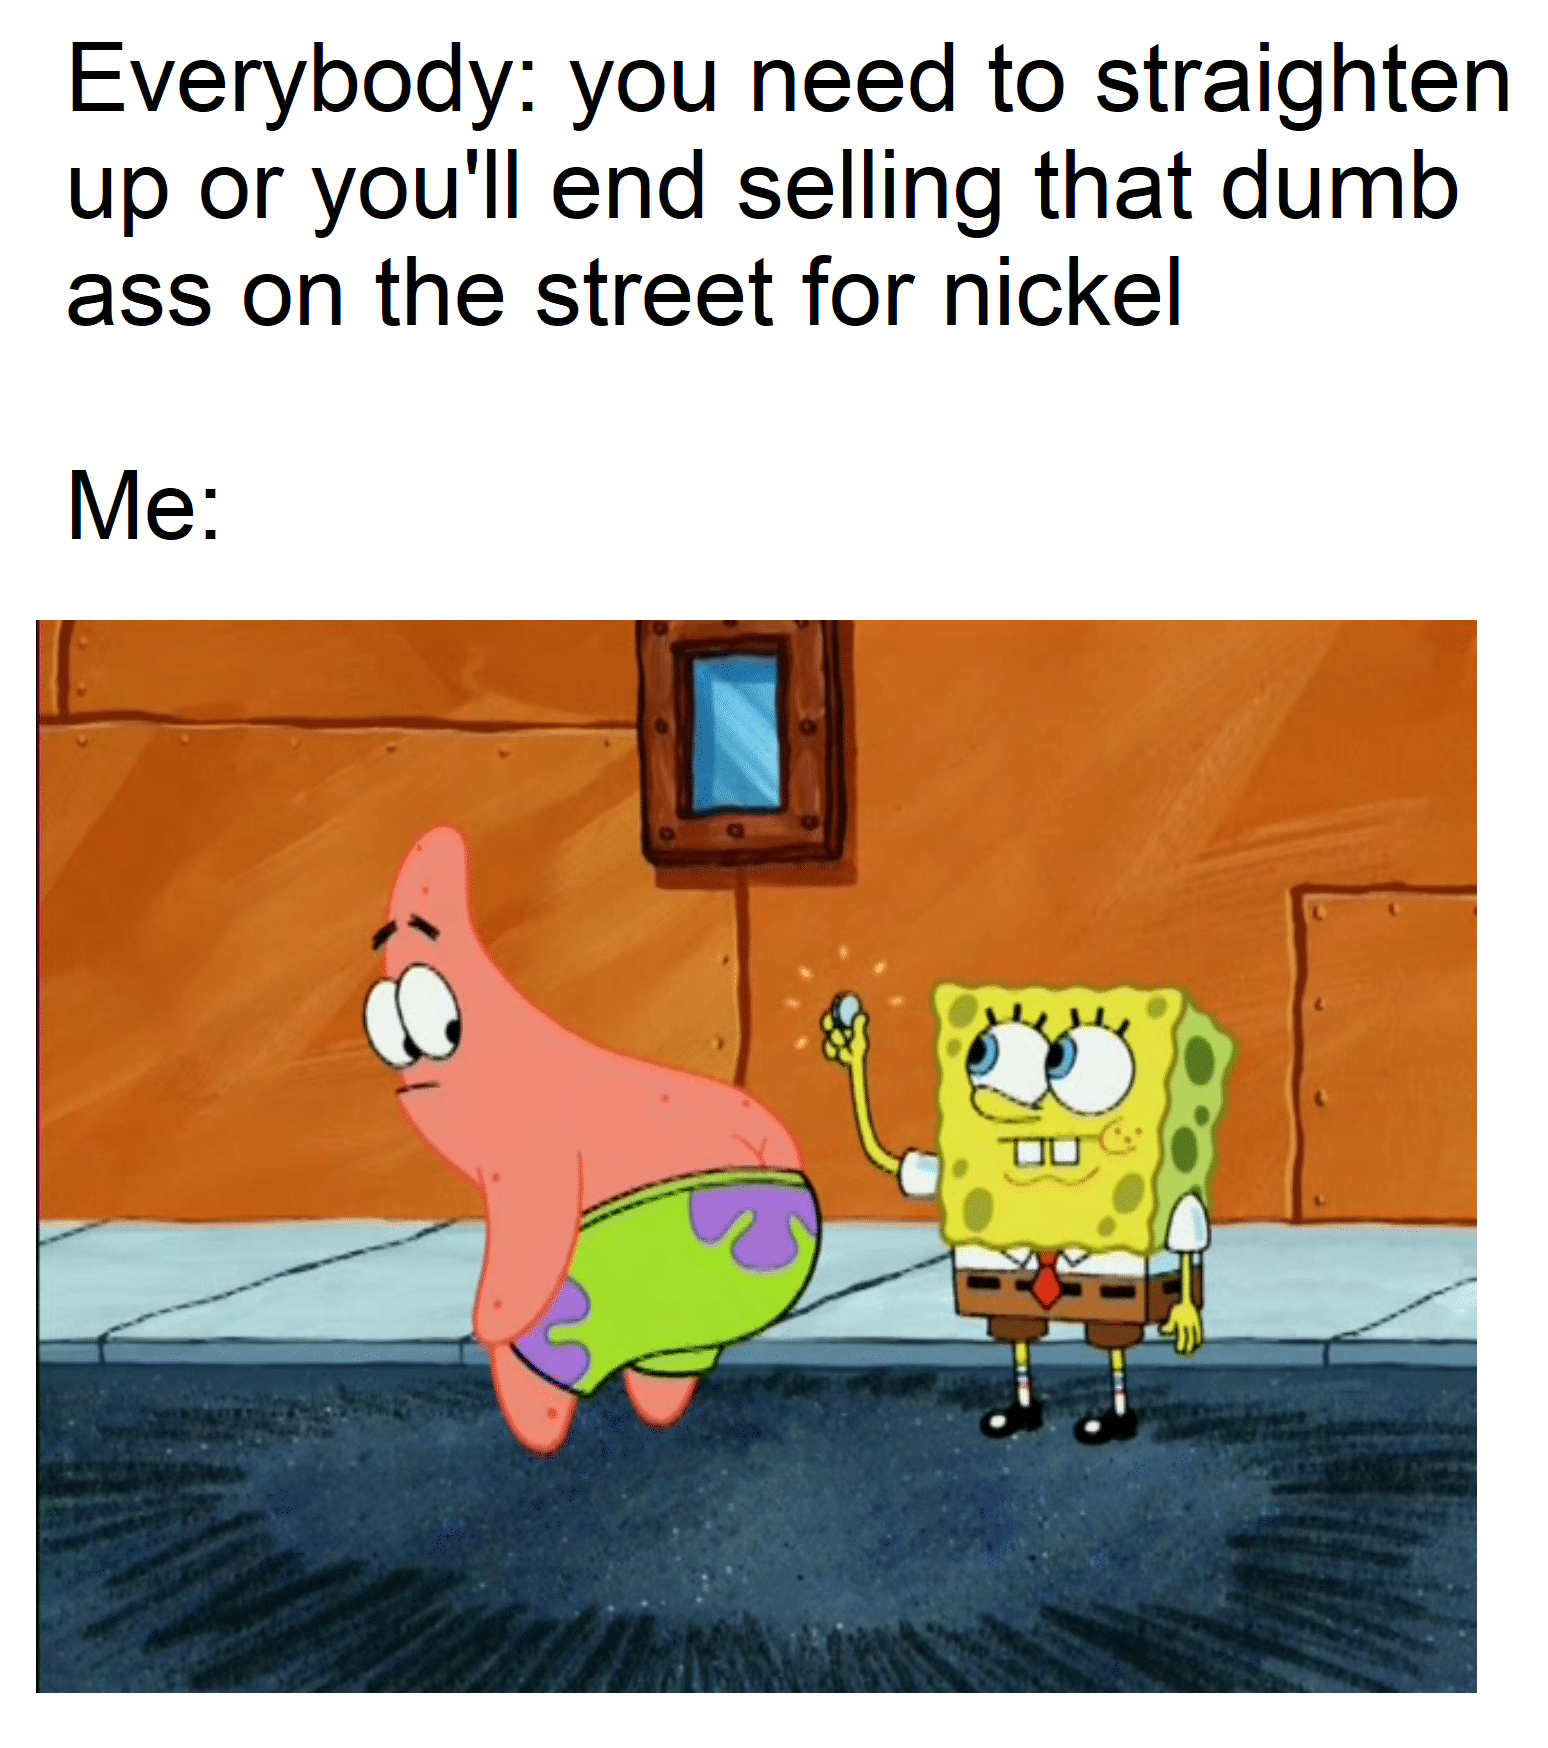 spongebob spongebob-memes spongebob text: Everybody: you need to straighten up or you'll end selling that dumb ass on the street for nickel 